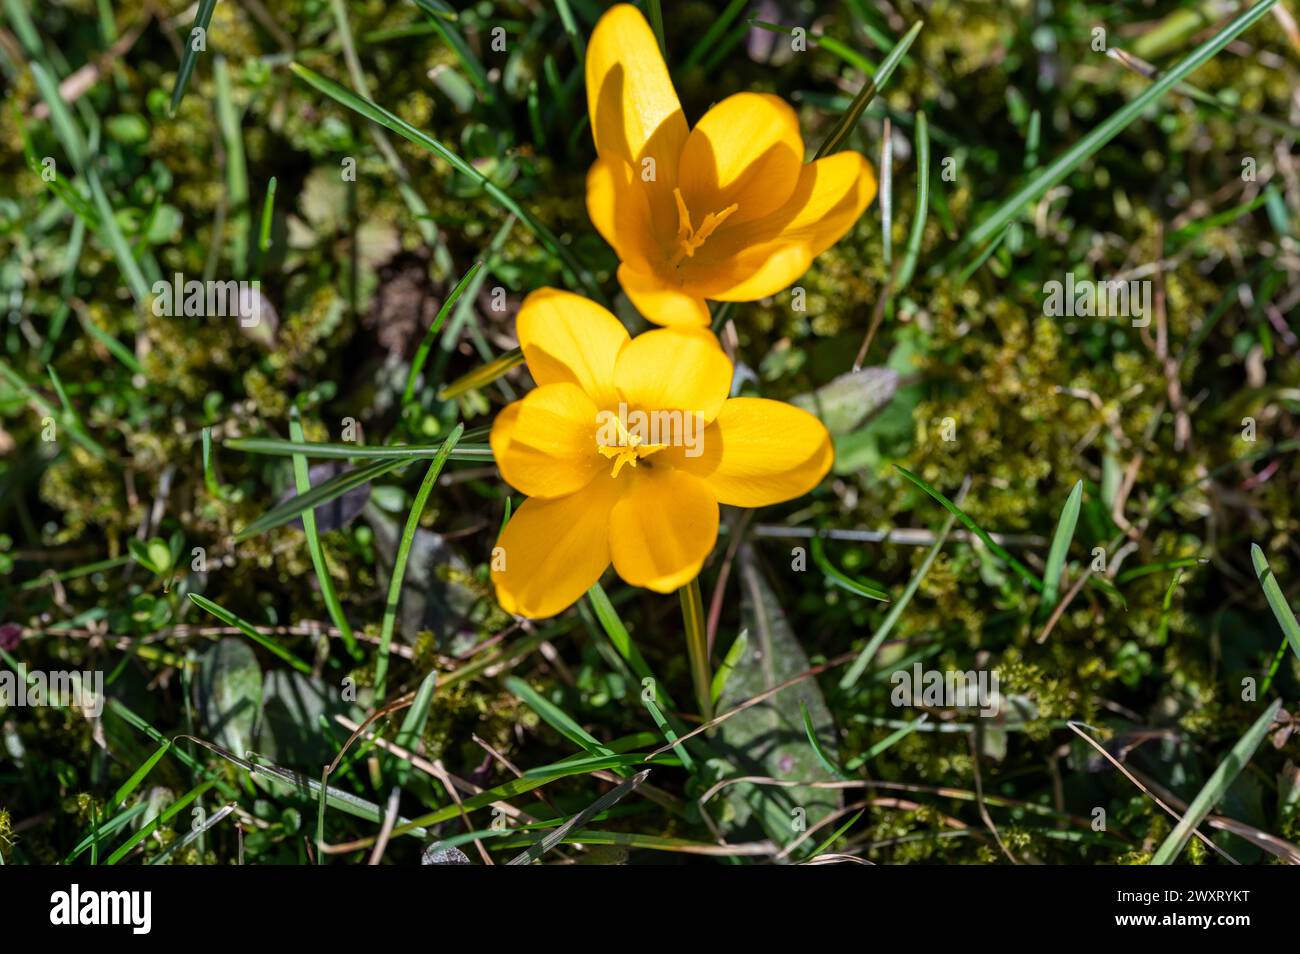 Yellow Crocus growing in a green mossy lawn Stock Photo